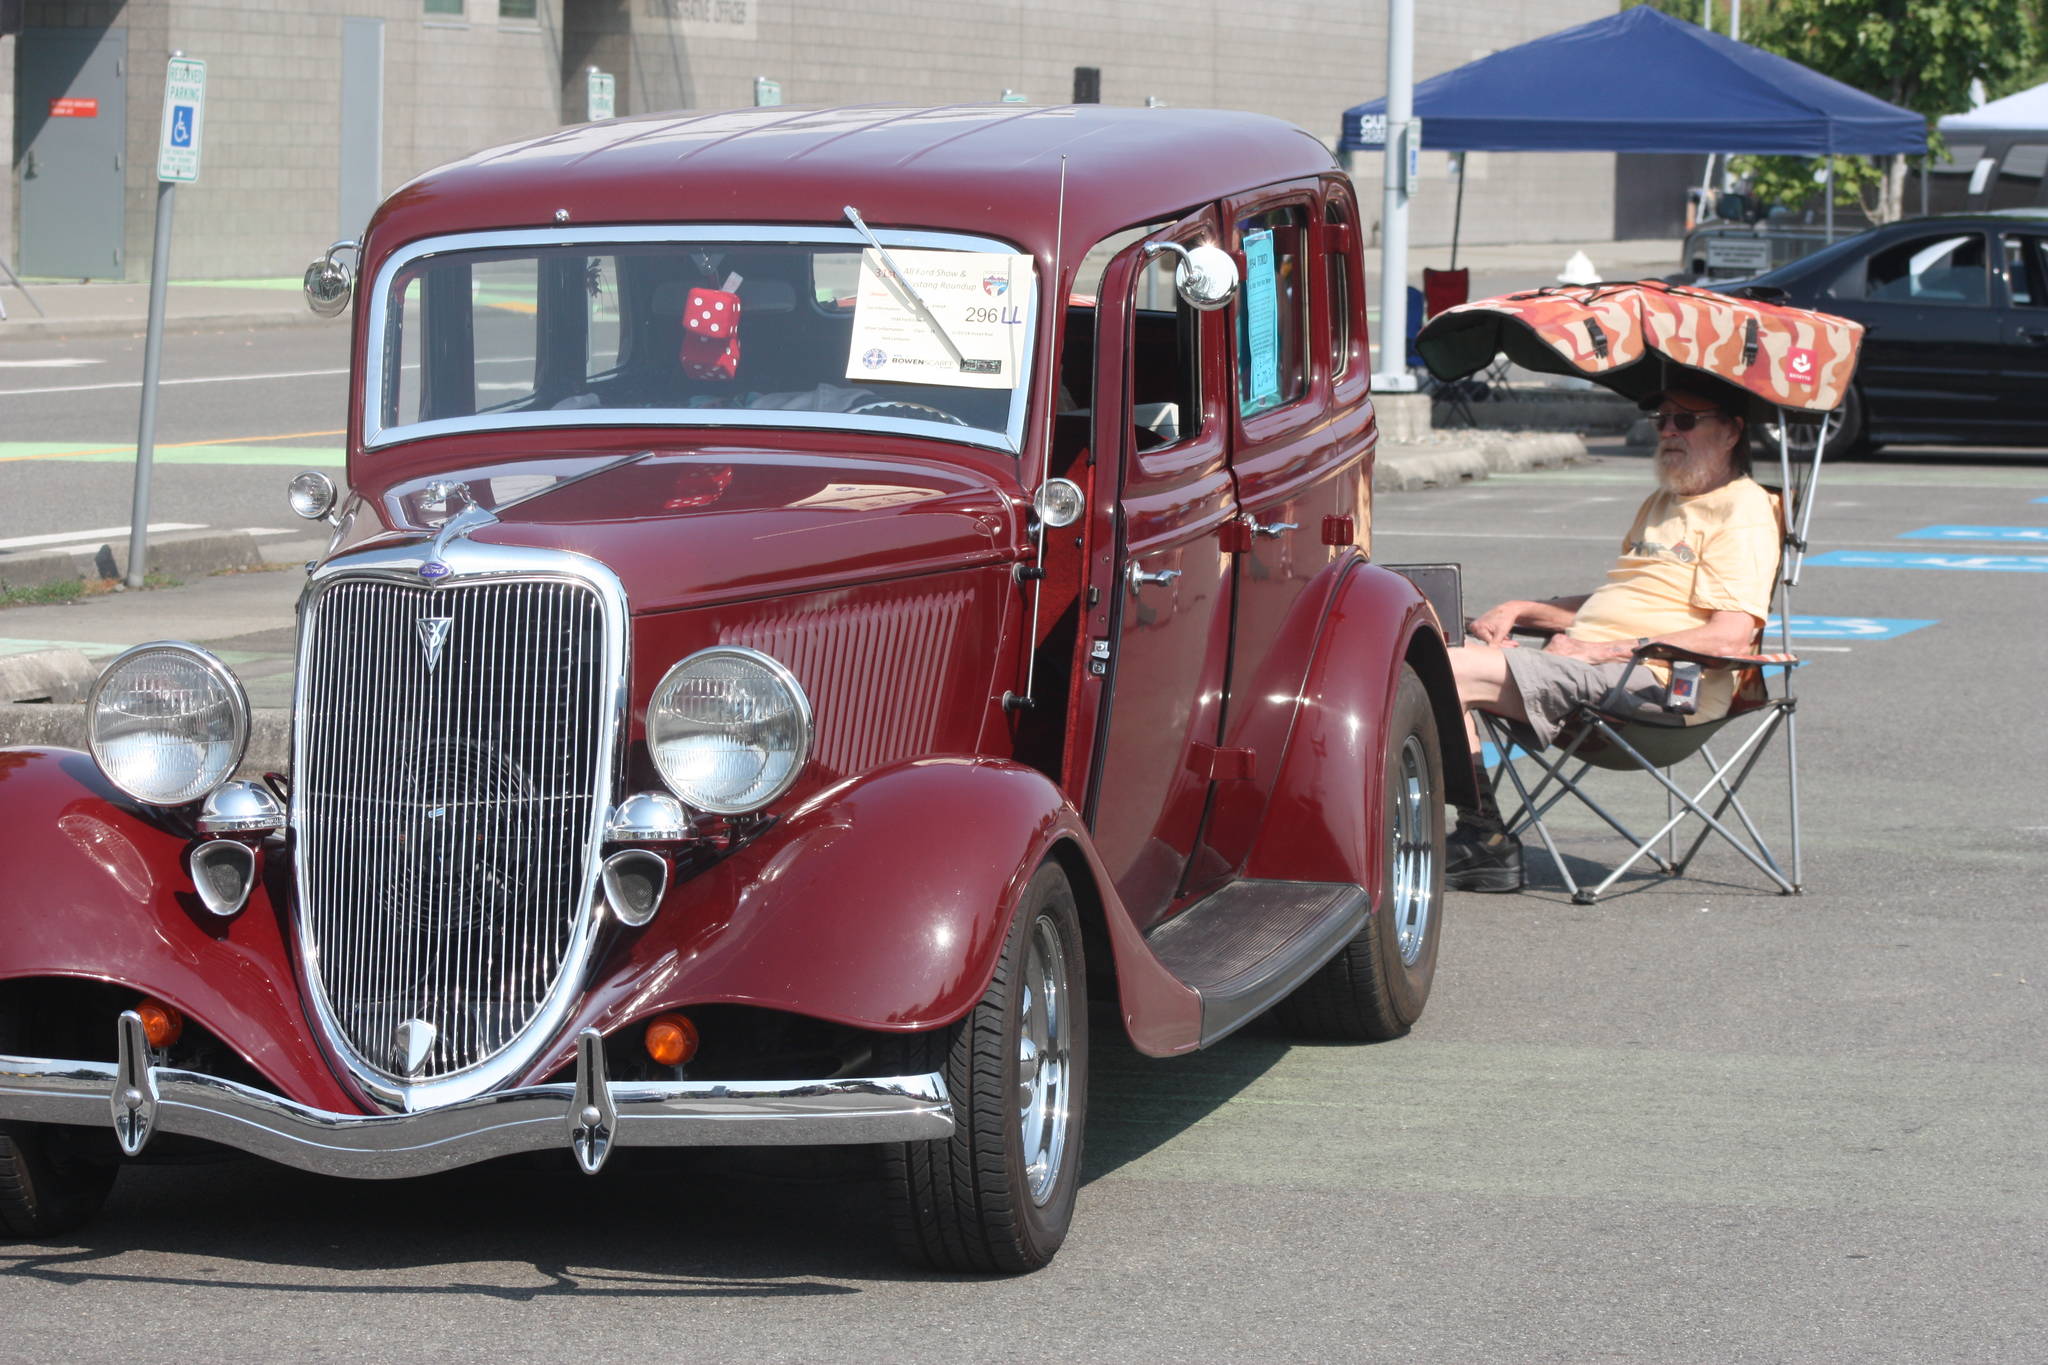 Neil Lemaster watches as his 1934 Ford Coupe, which he drove to the show from Mercer Island, glimmers in the sun last Saturday. MARK KLAAS, Kent Reporter